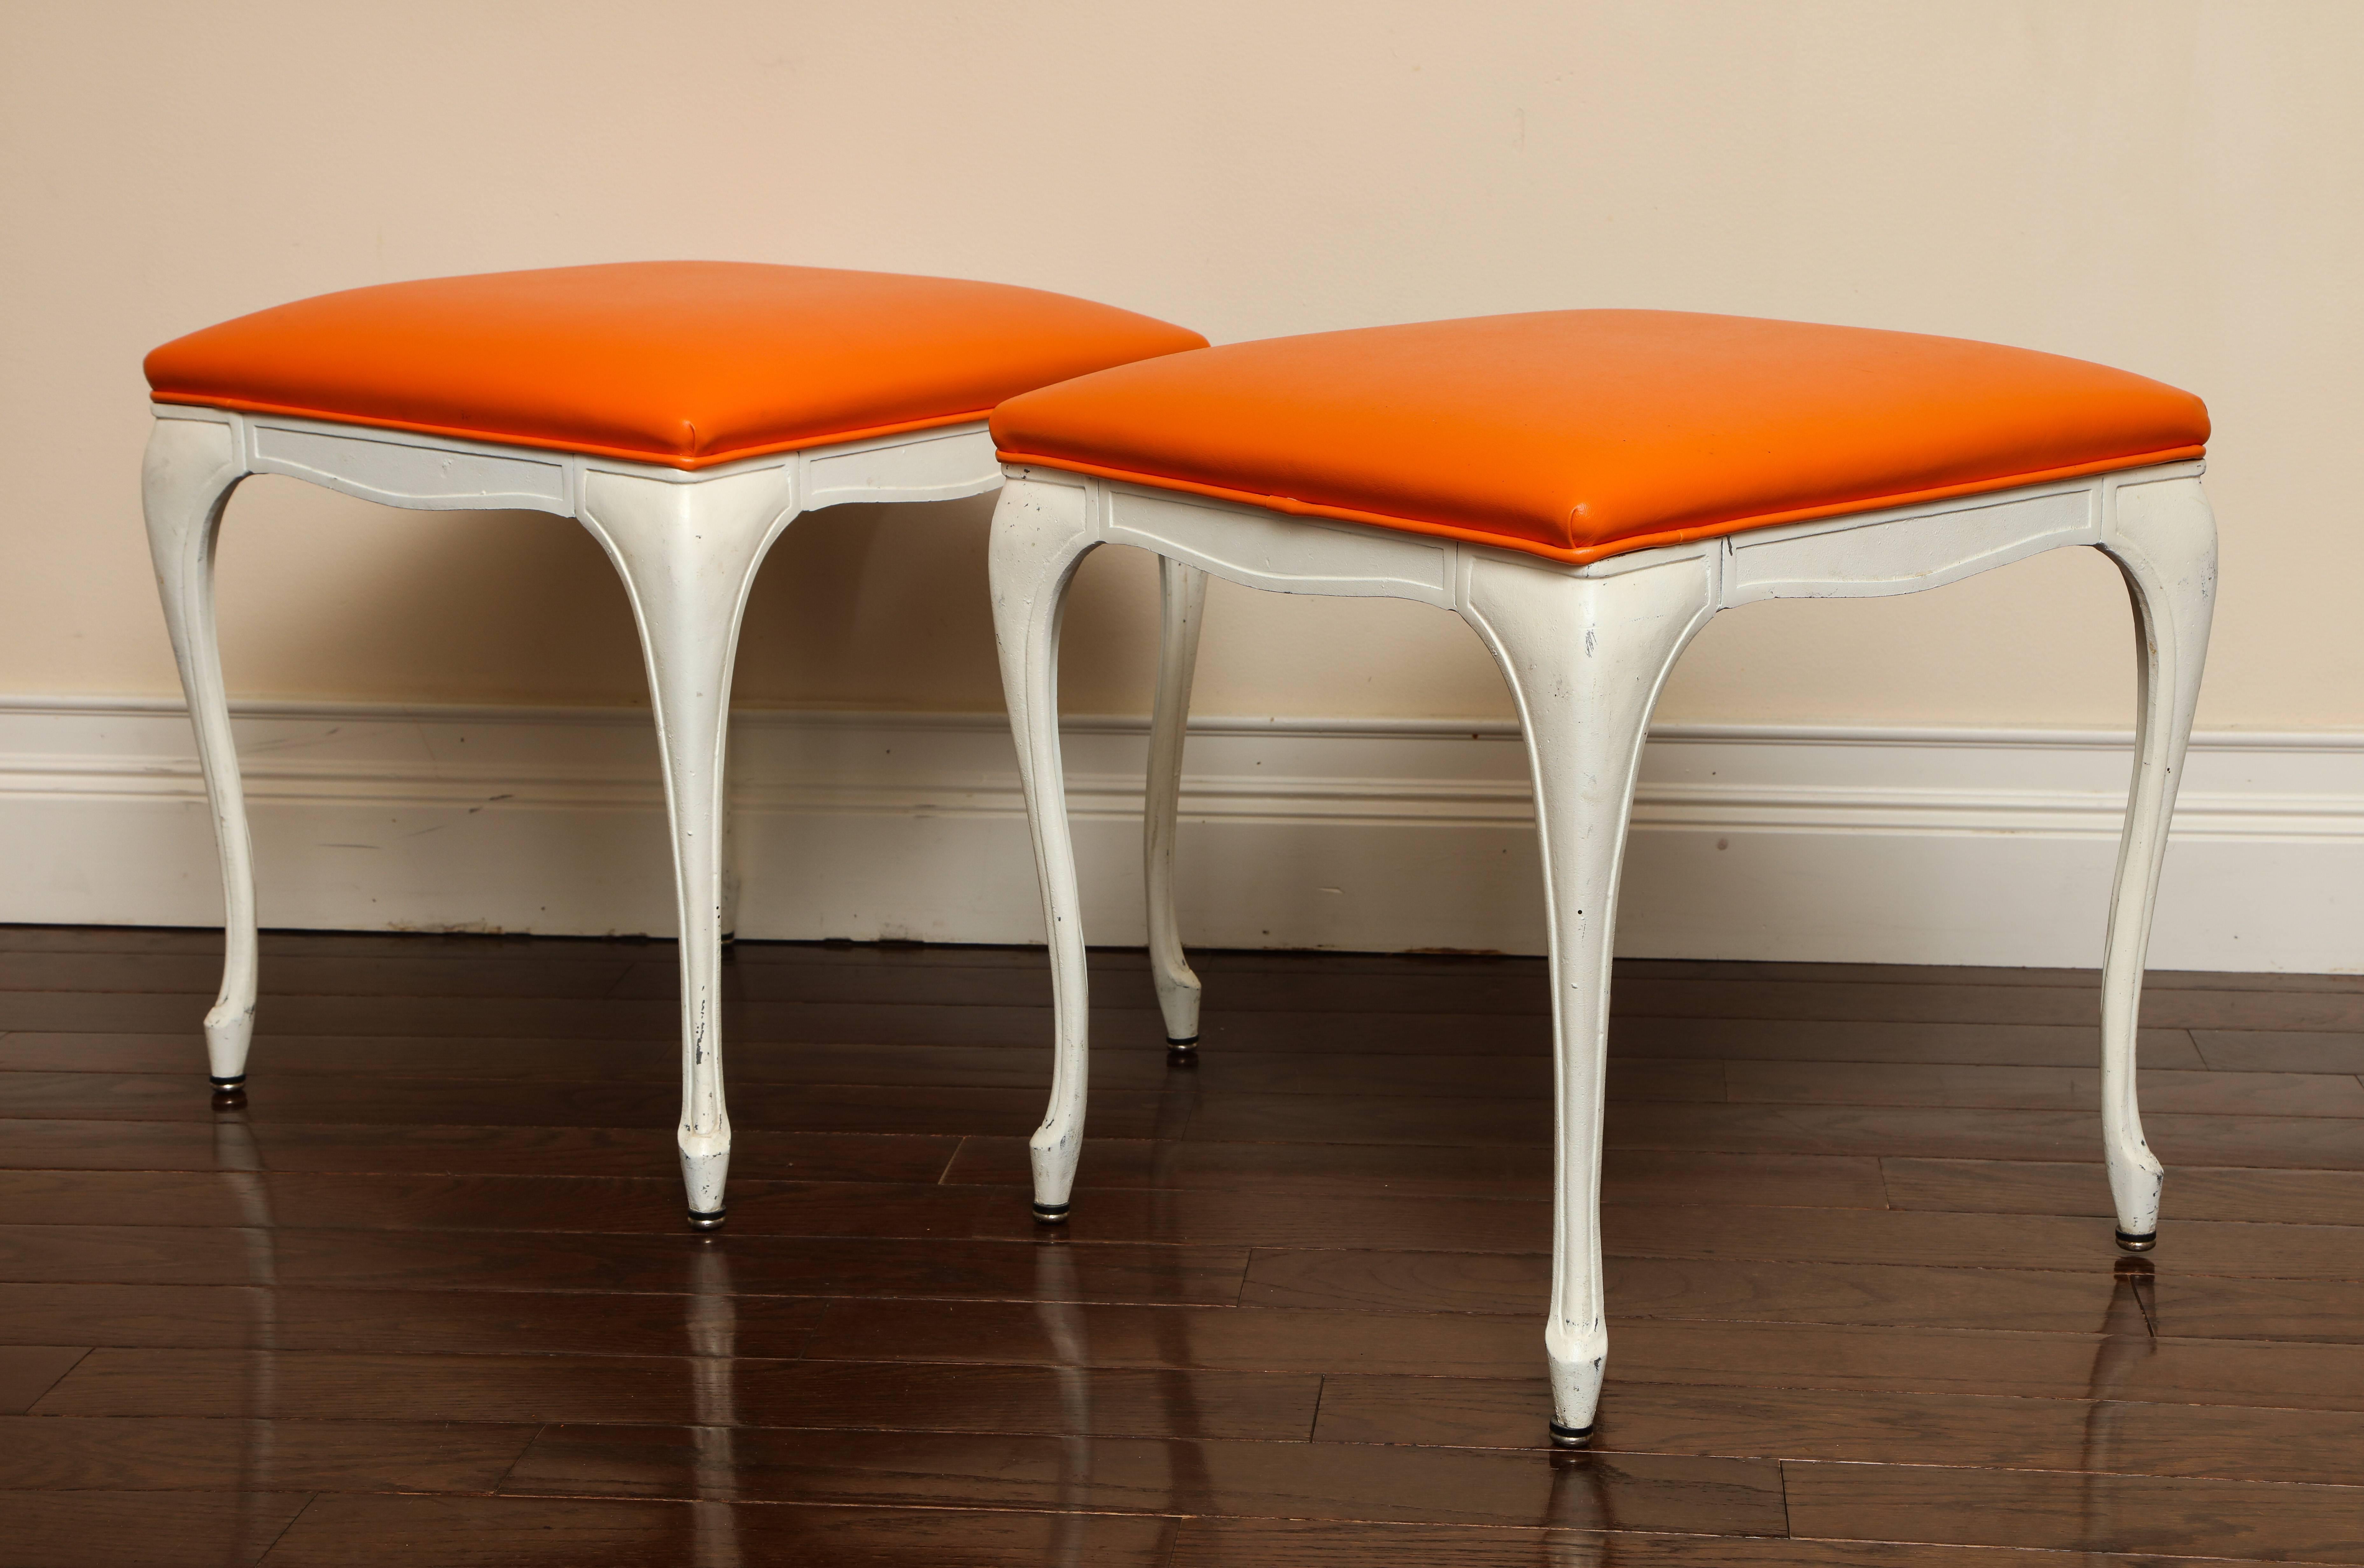 American Pair of Mid-Century Modern Painted White Metal Benches or Stools